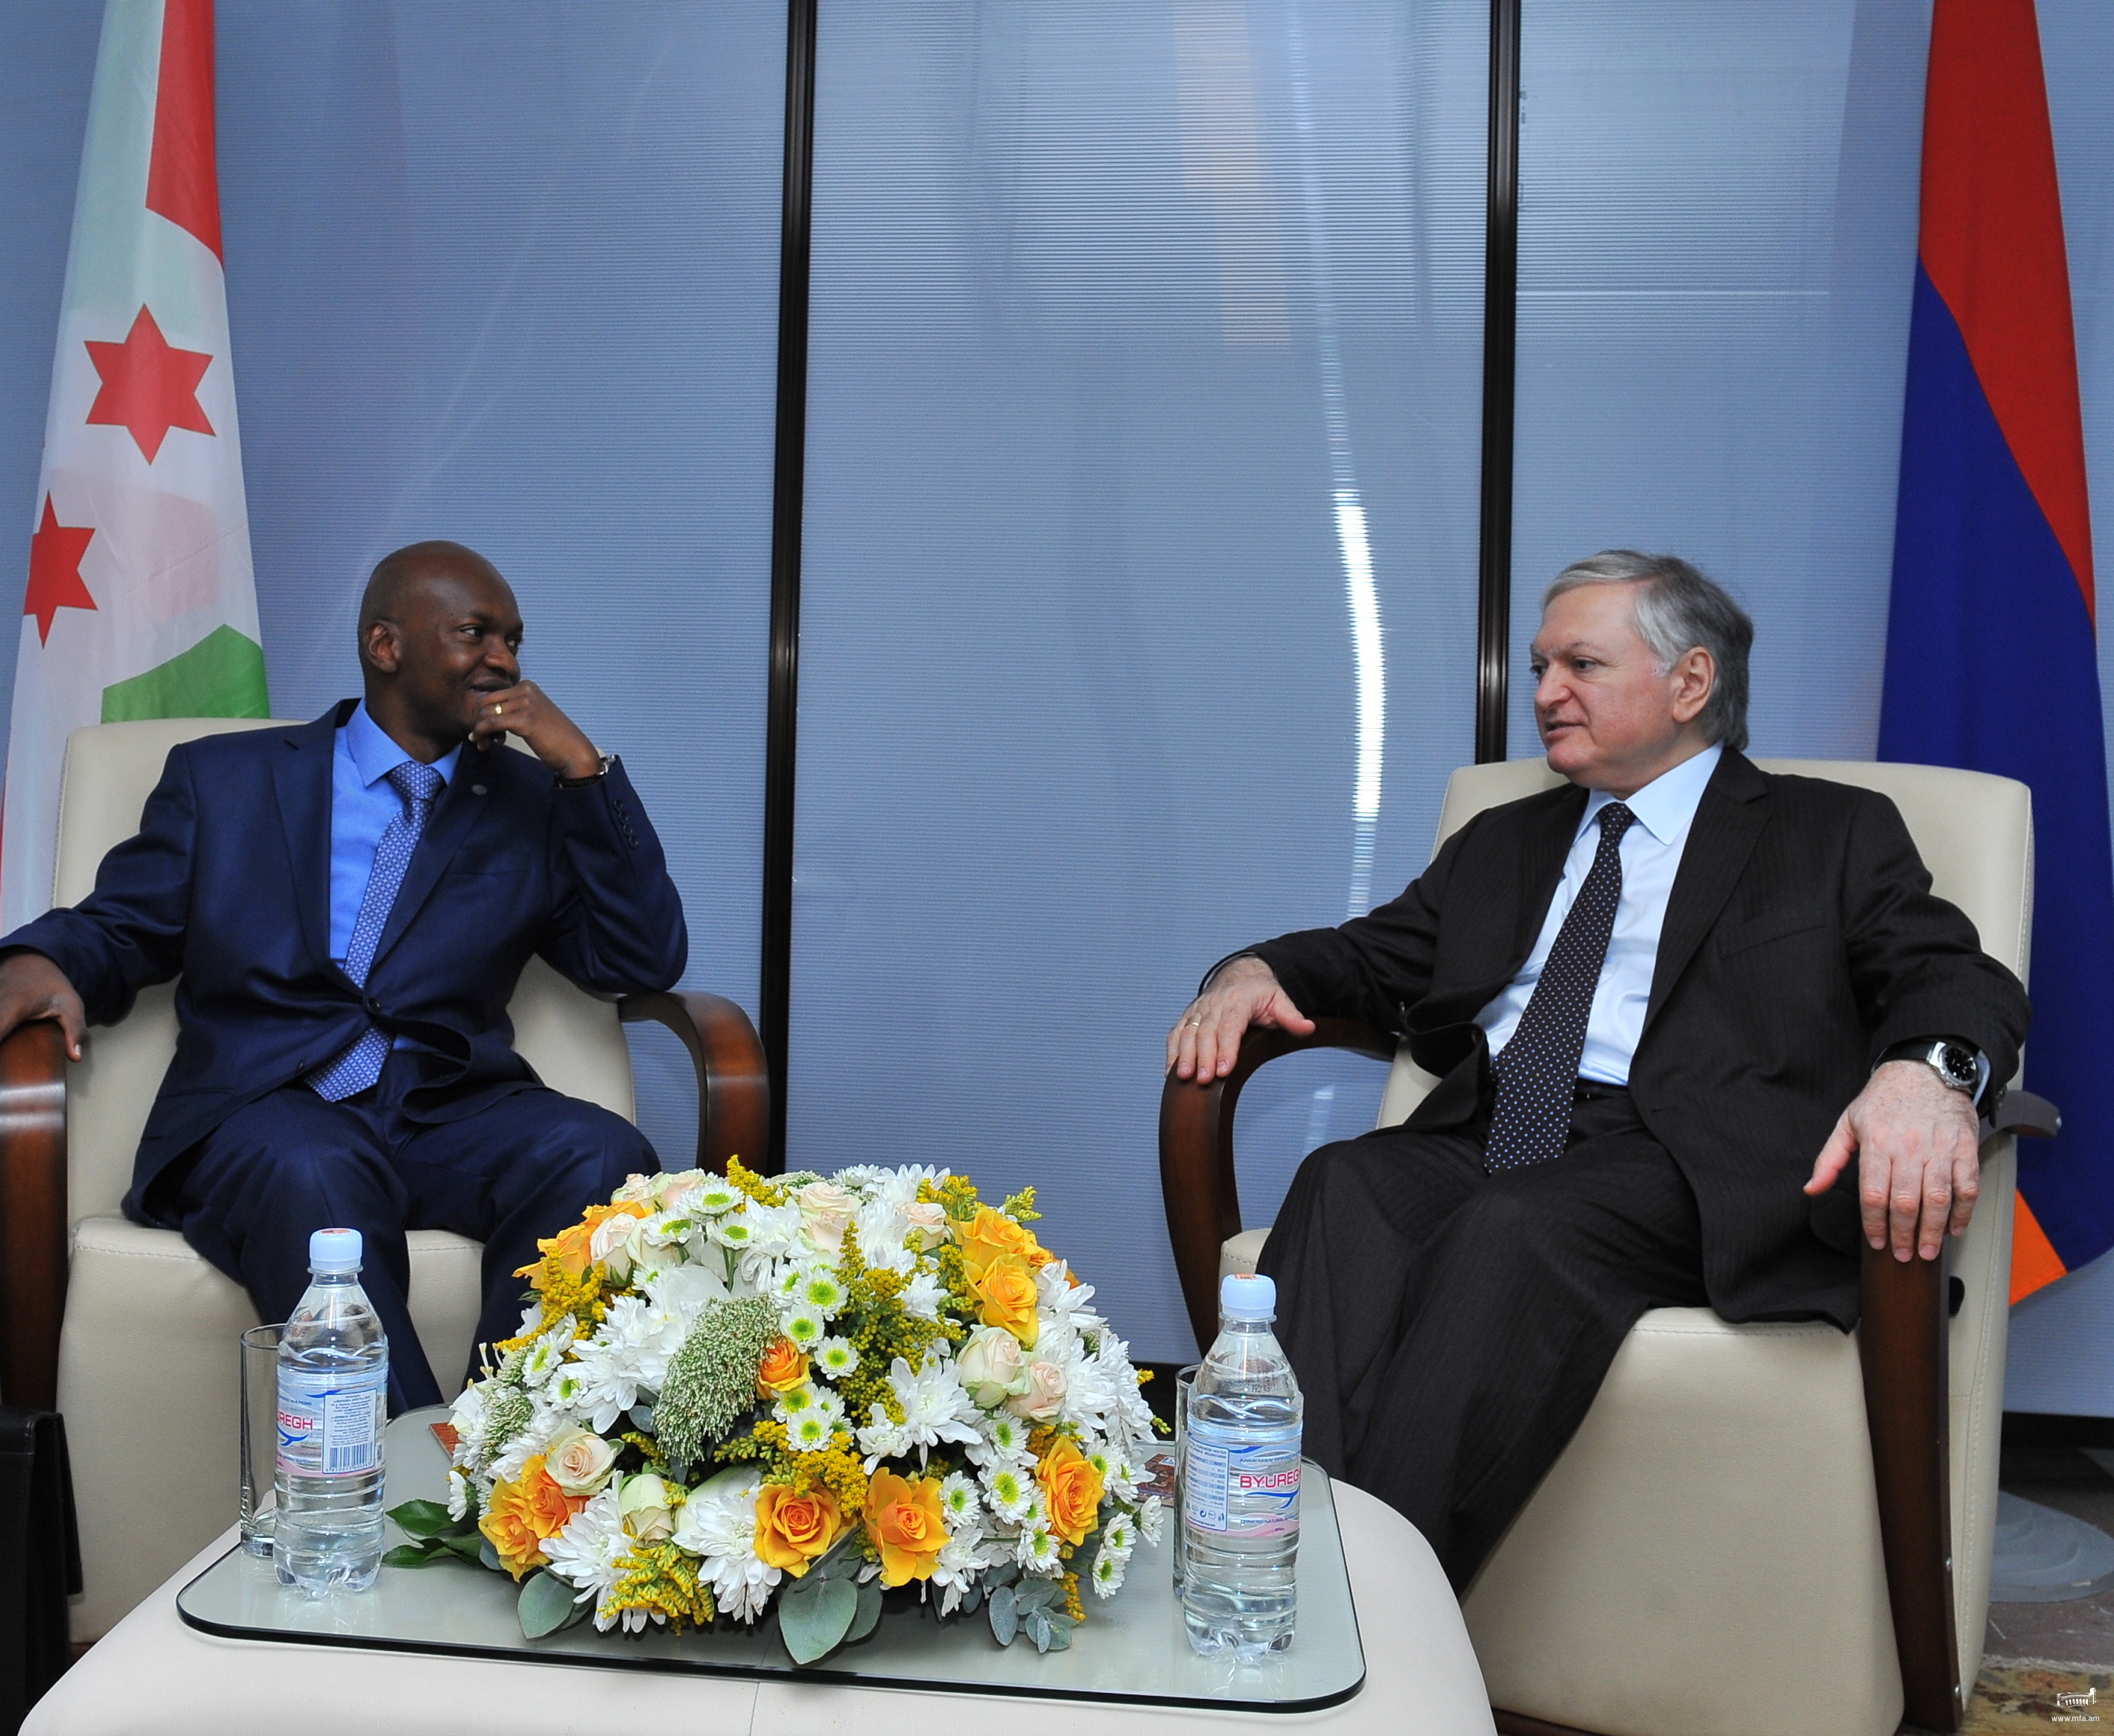 Meeting of Armenia's Minister of Foreign Affairs and Burundi Minister of Foreign Affairs and International Cooperation